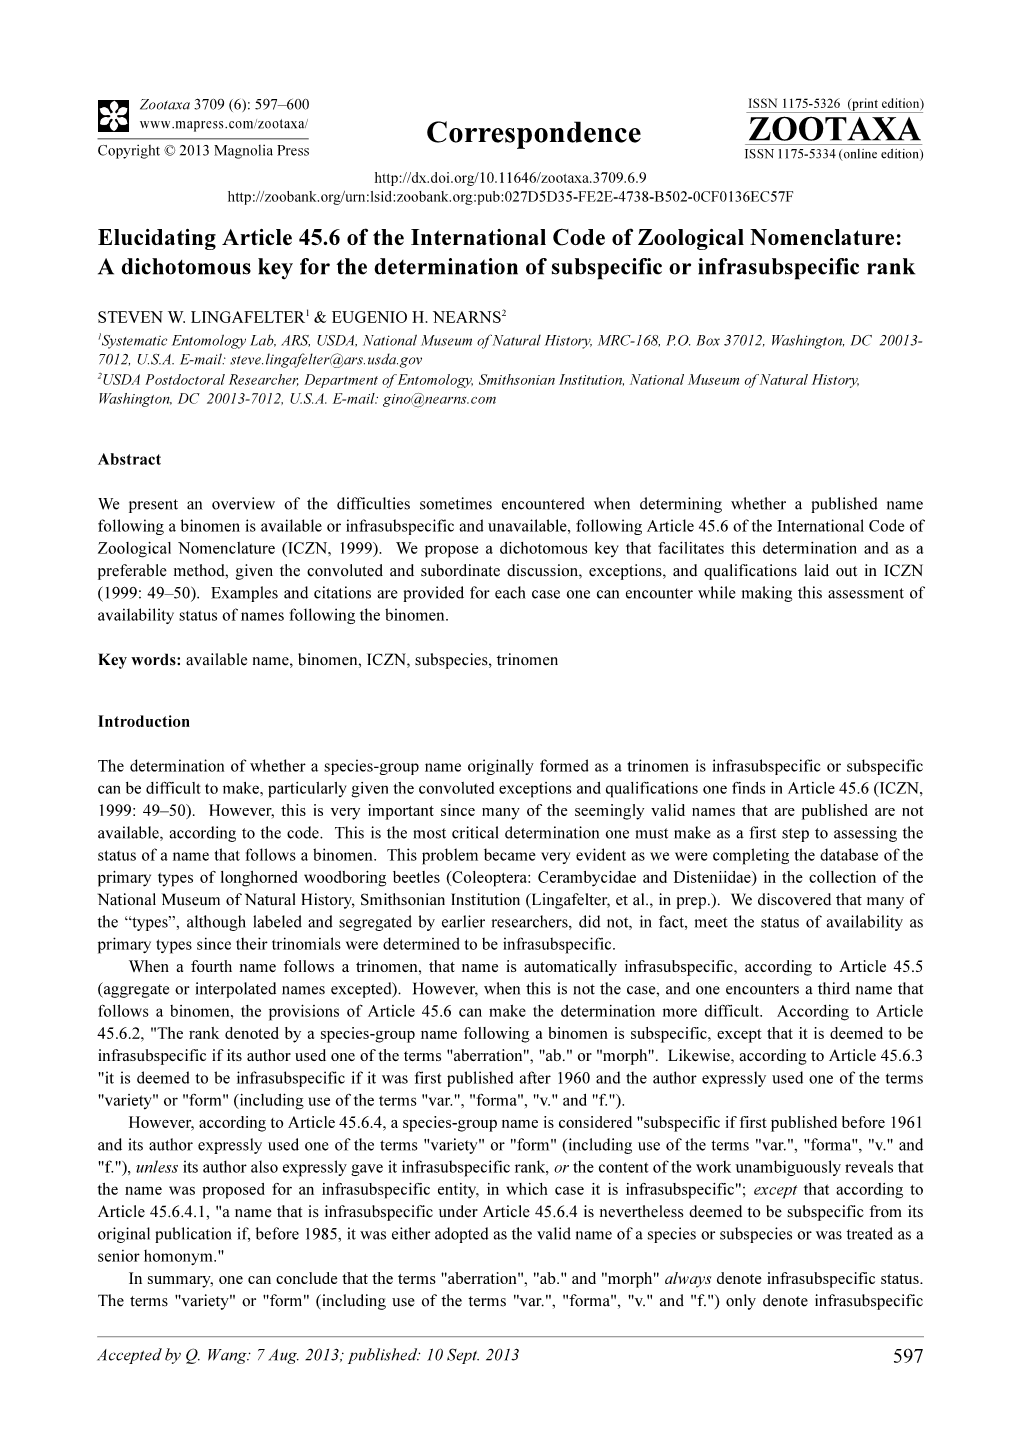 Elucidating Article 45.6 of the International Code of Zoological Nomenclature: a Dichotomous Key for the Determination of Subspecific Or Infrasubspecific Rank